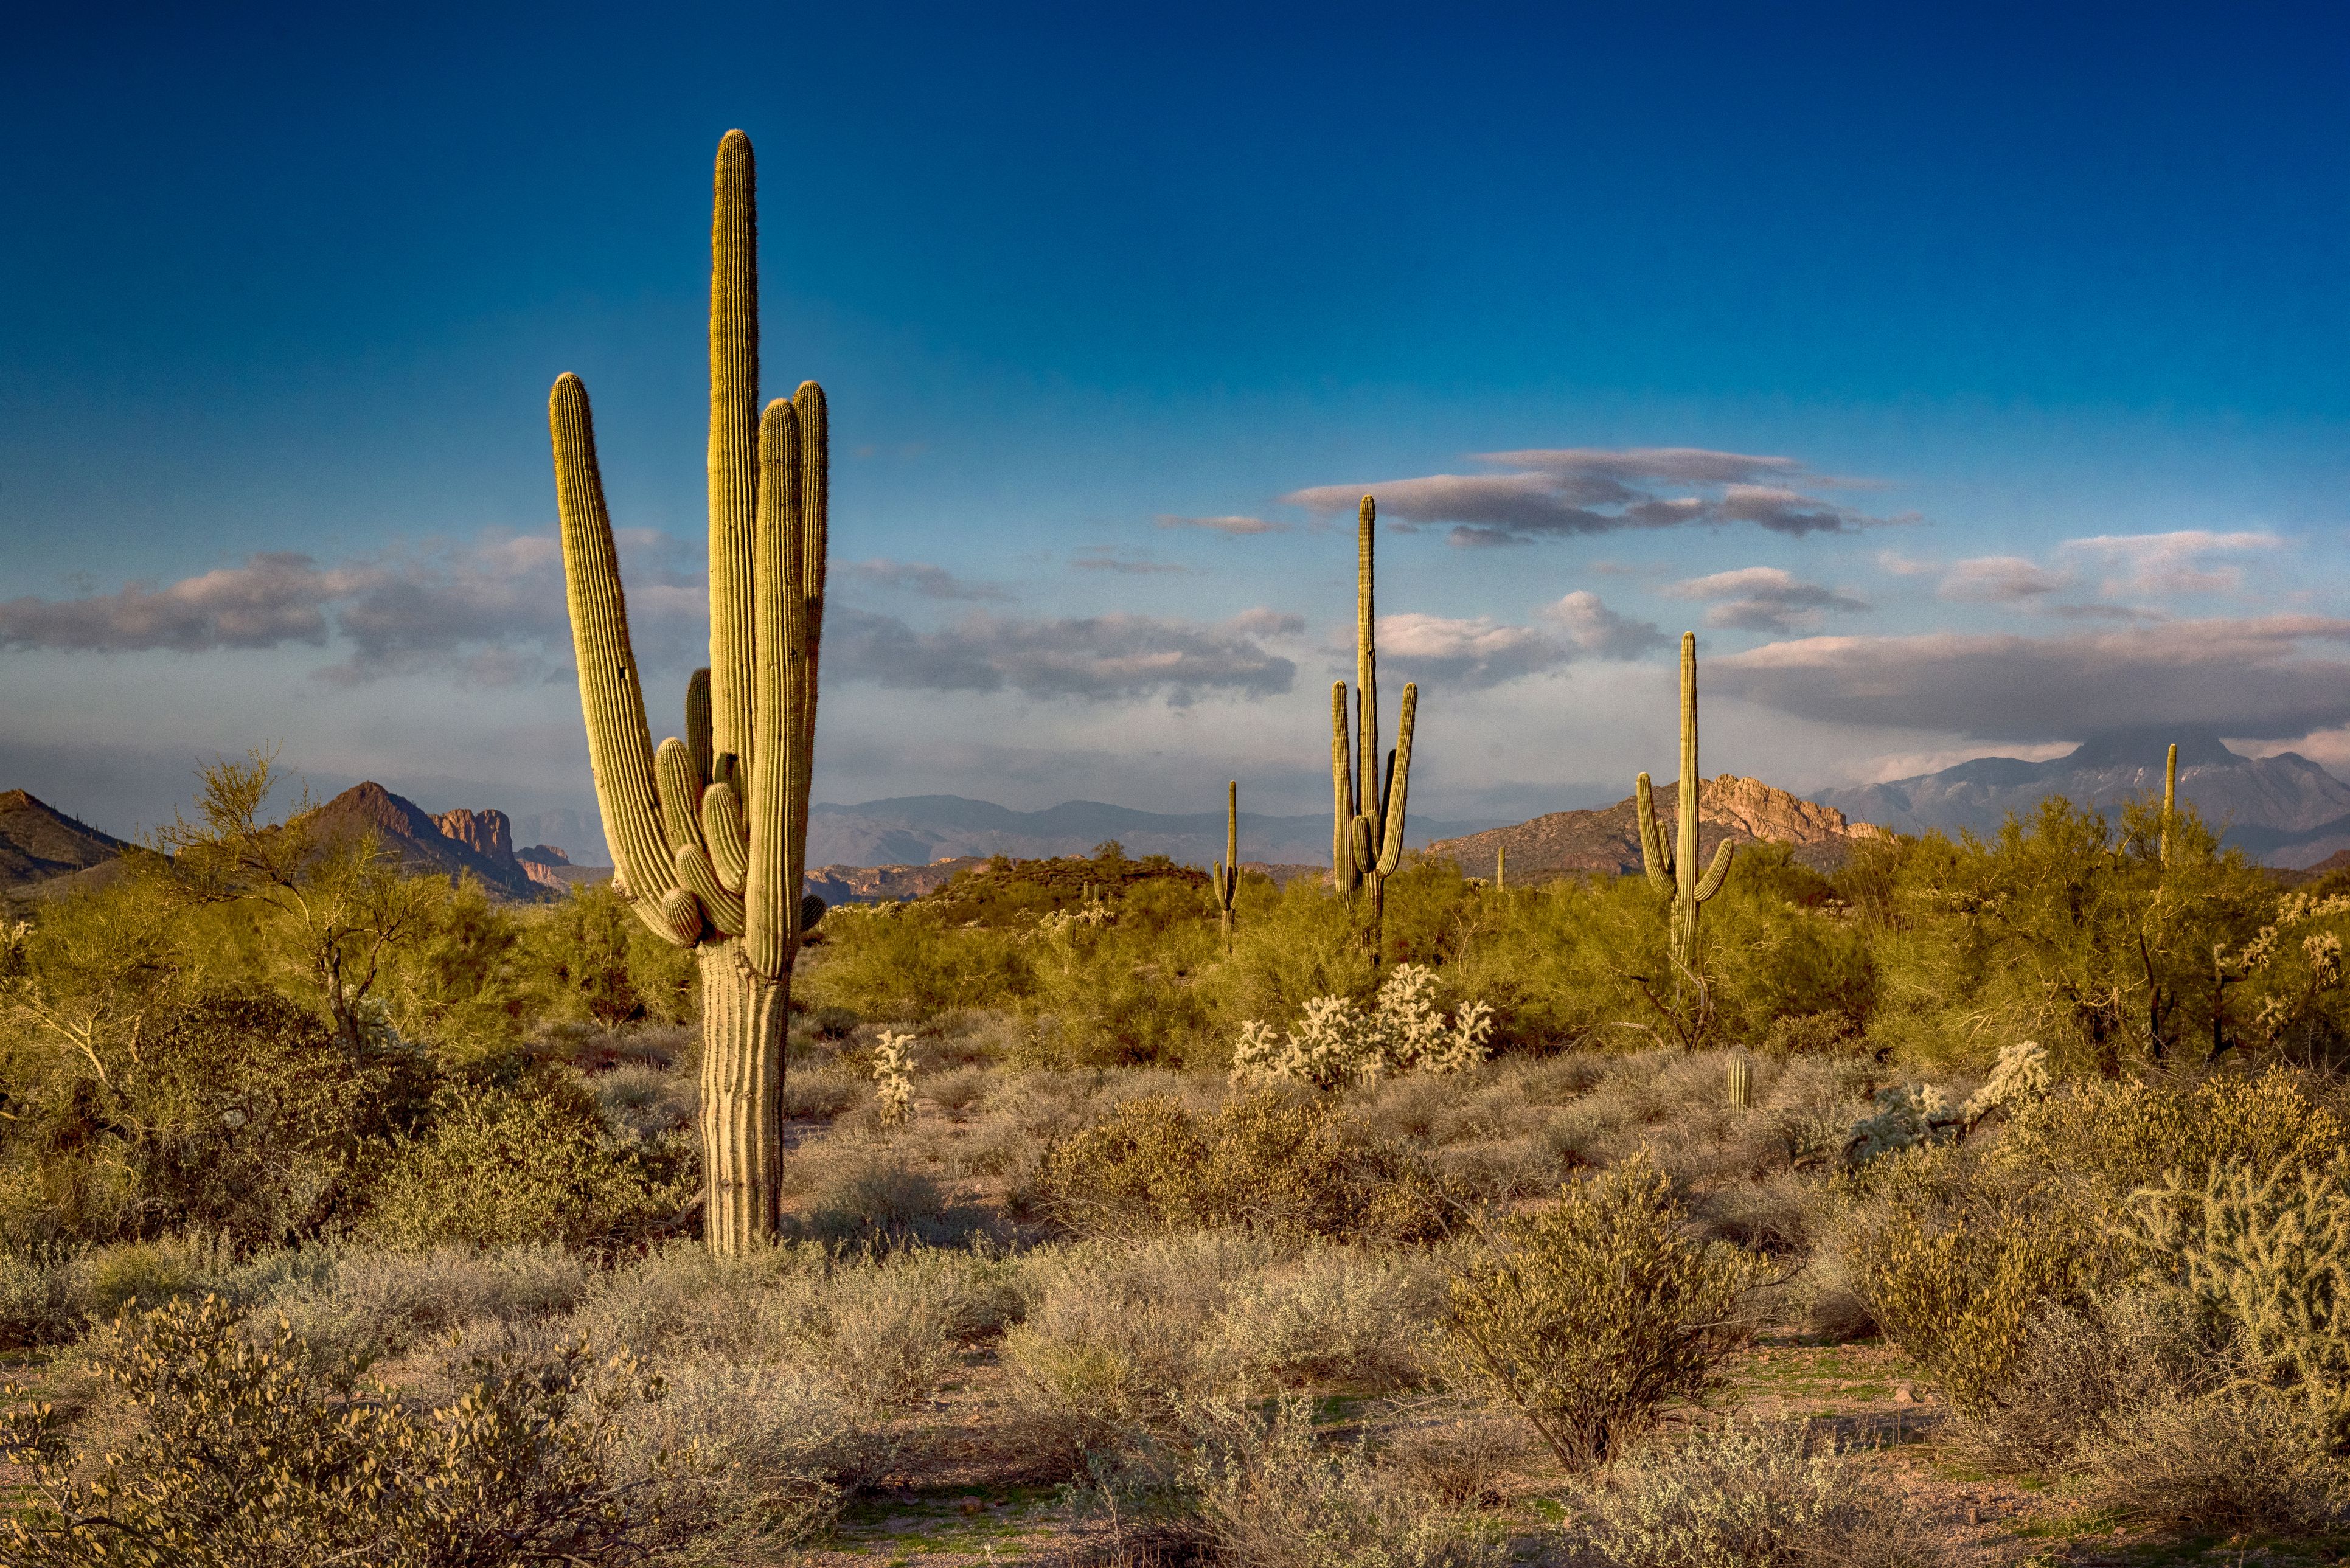 What is the current local time in Phoenix, Arizona?